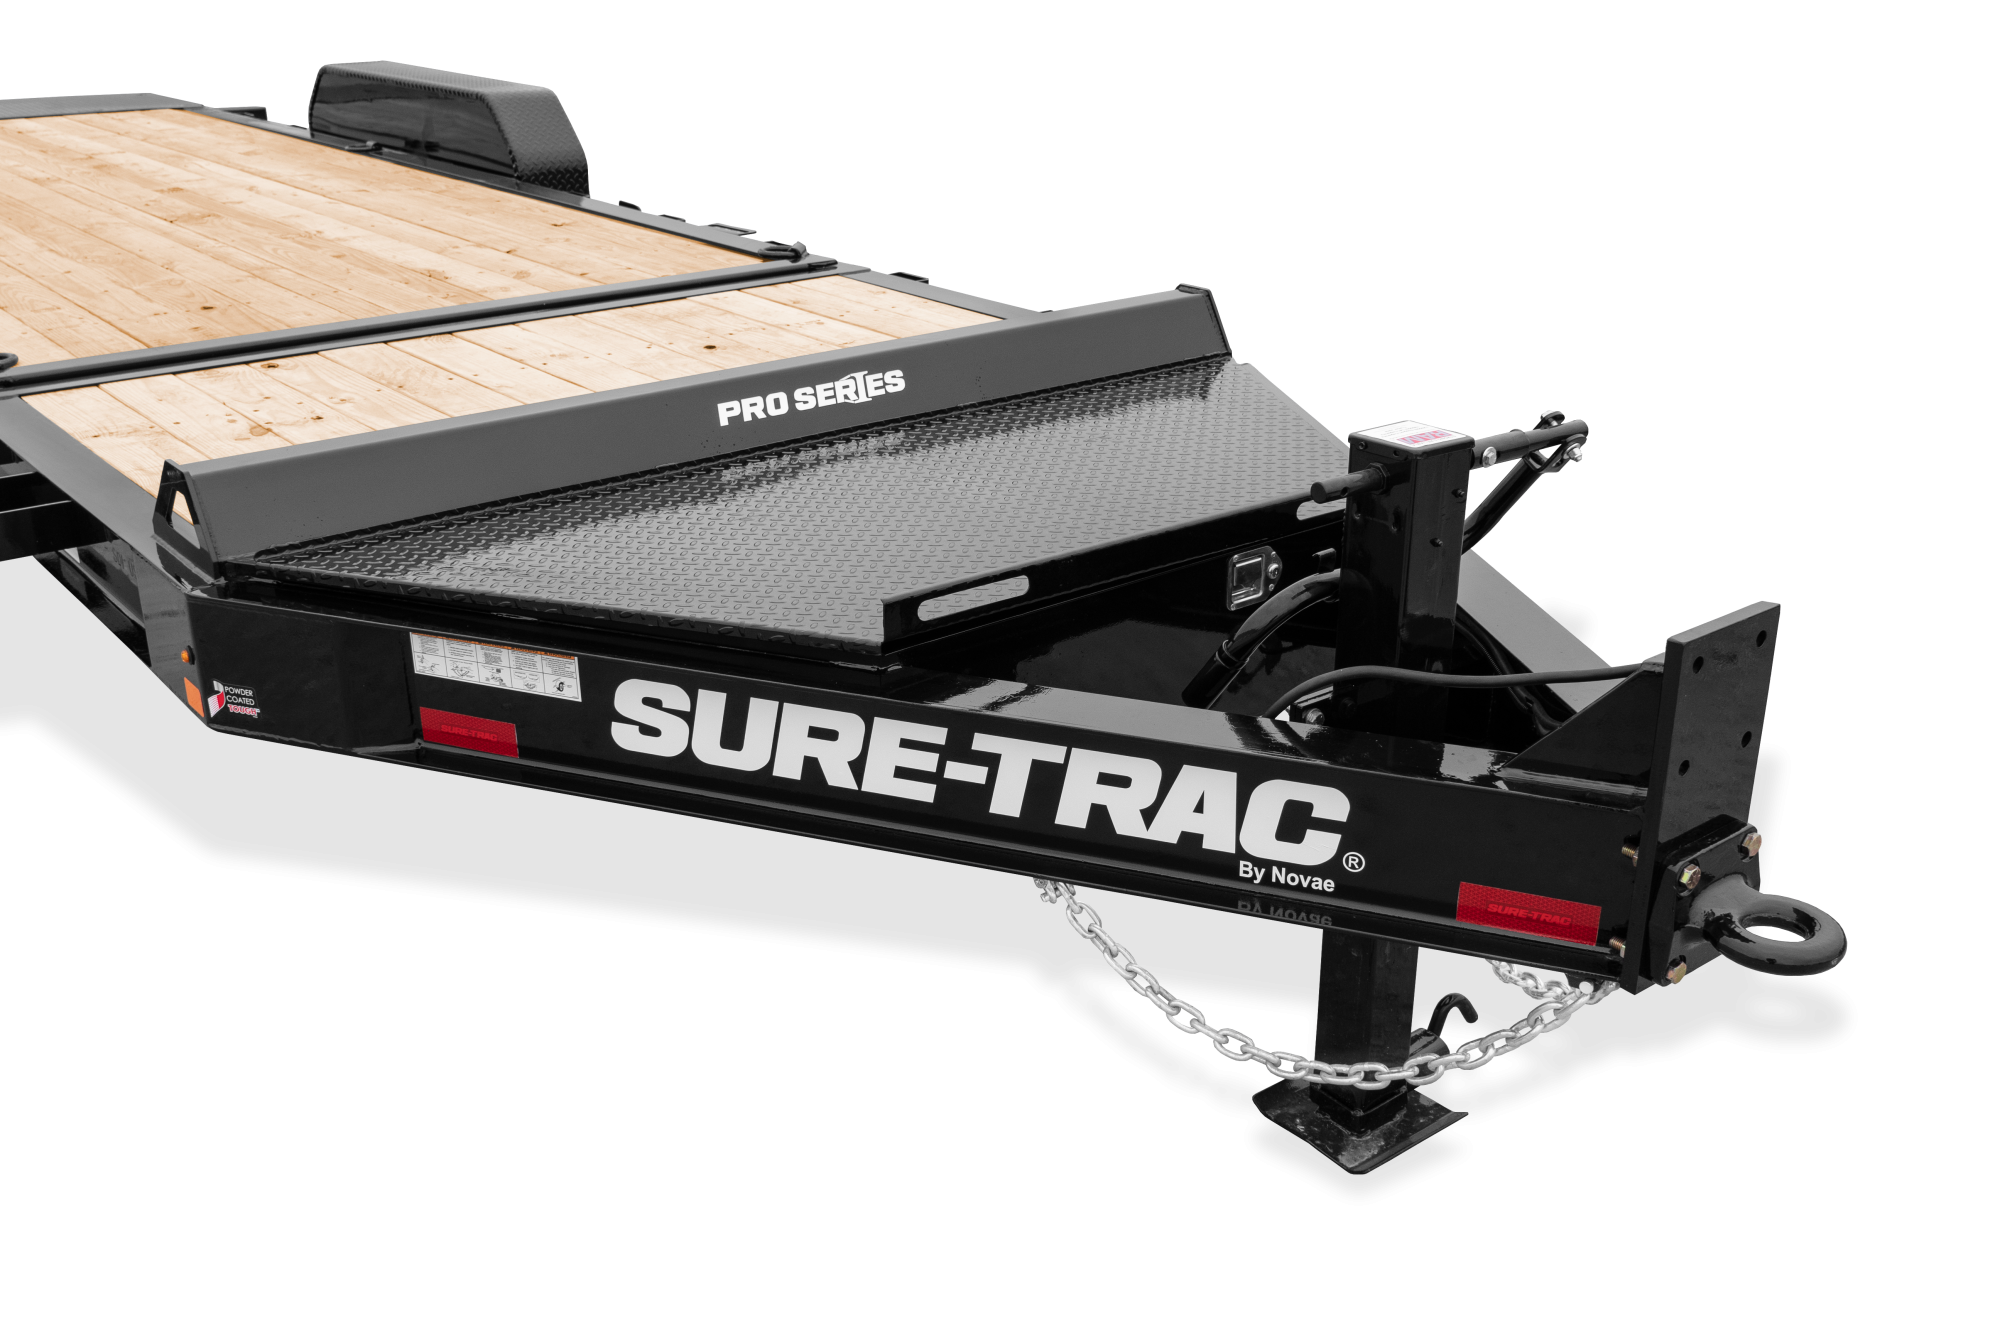 Sure-Trac | Pro Series Tilt Bed Trailer | Image | Front side, tilted, Pro Series Tilt Bed Trailer with reflective tape, close-up of tongue